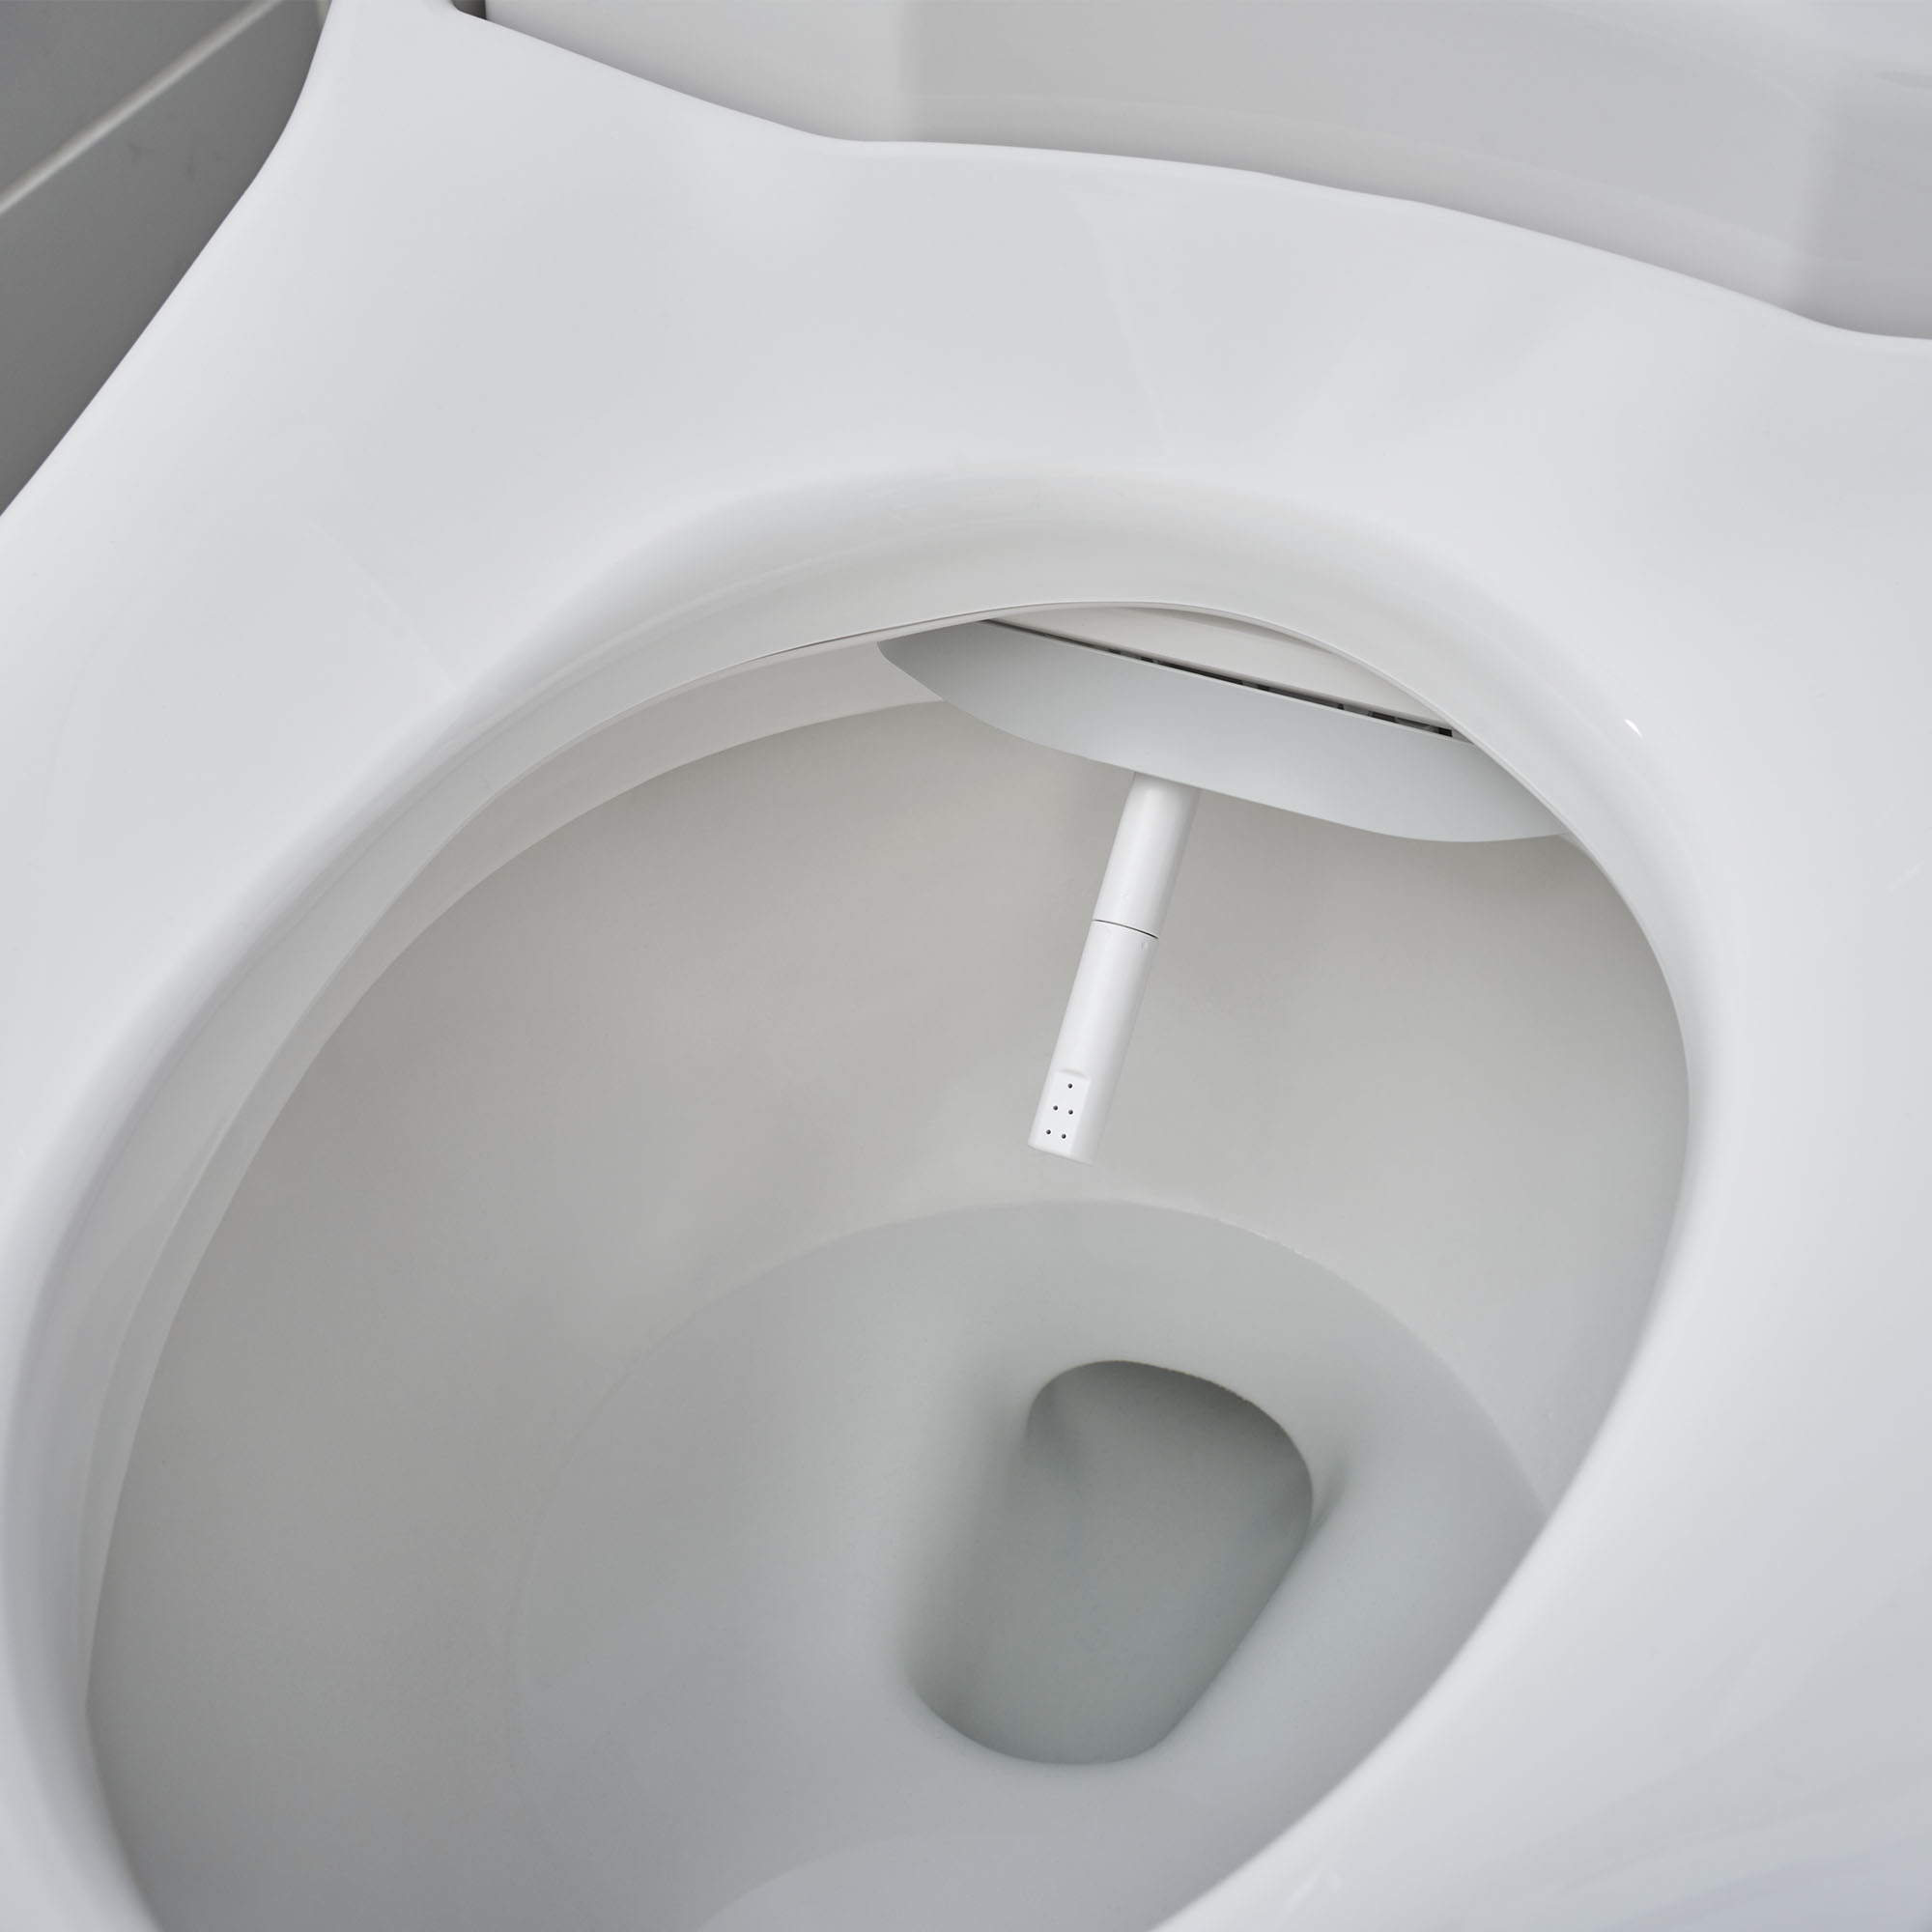 Advanced Clean™ 2.5 Electric SpaLet™ Bidet Seat With Remote Operation